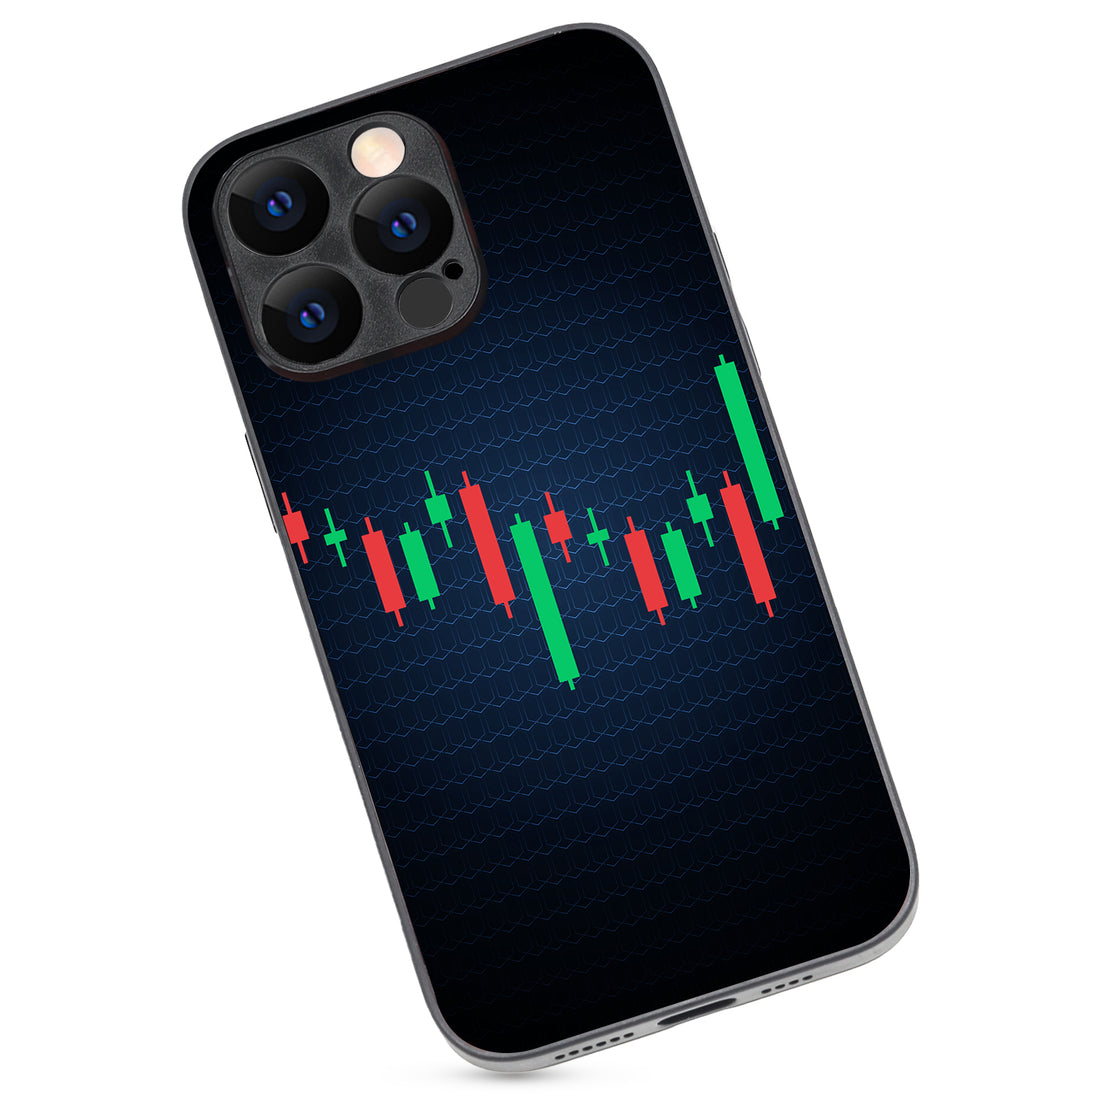 Candlestick Trading iPhone 14 Pro Max Case